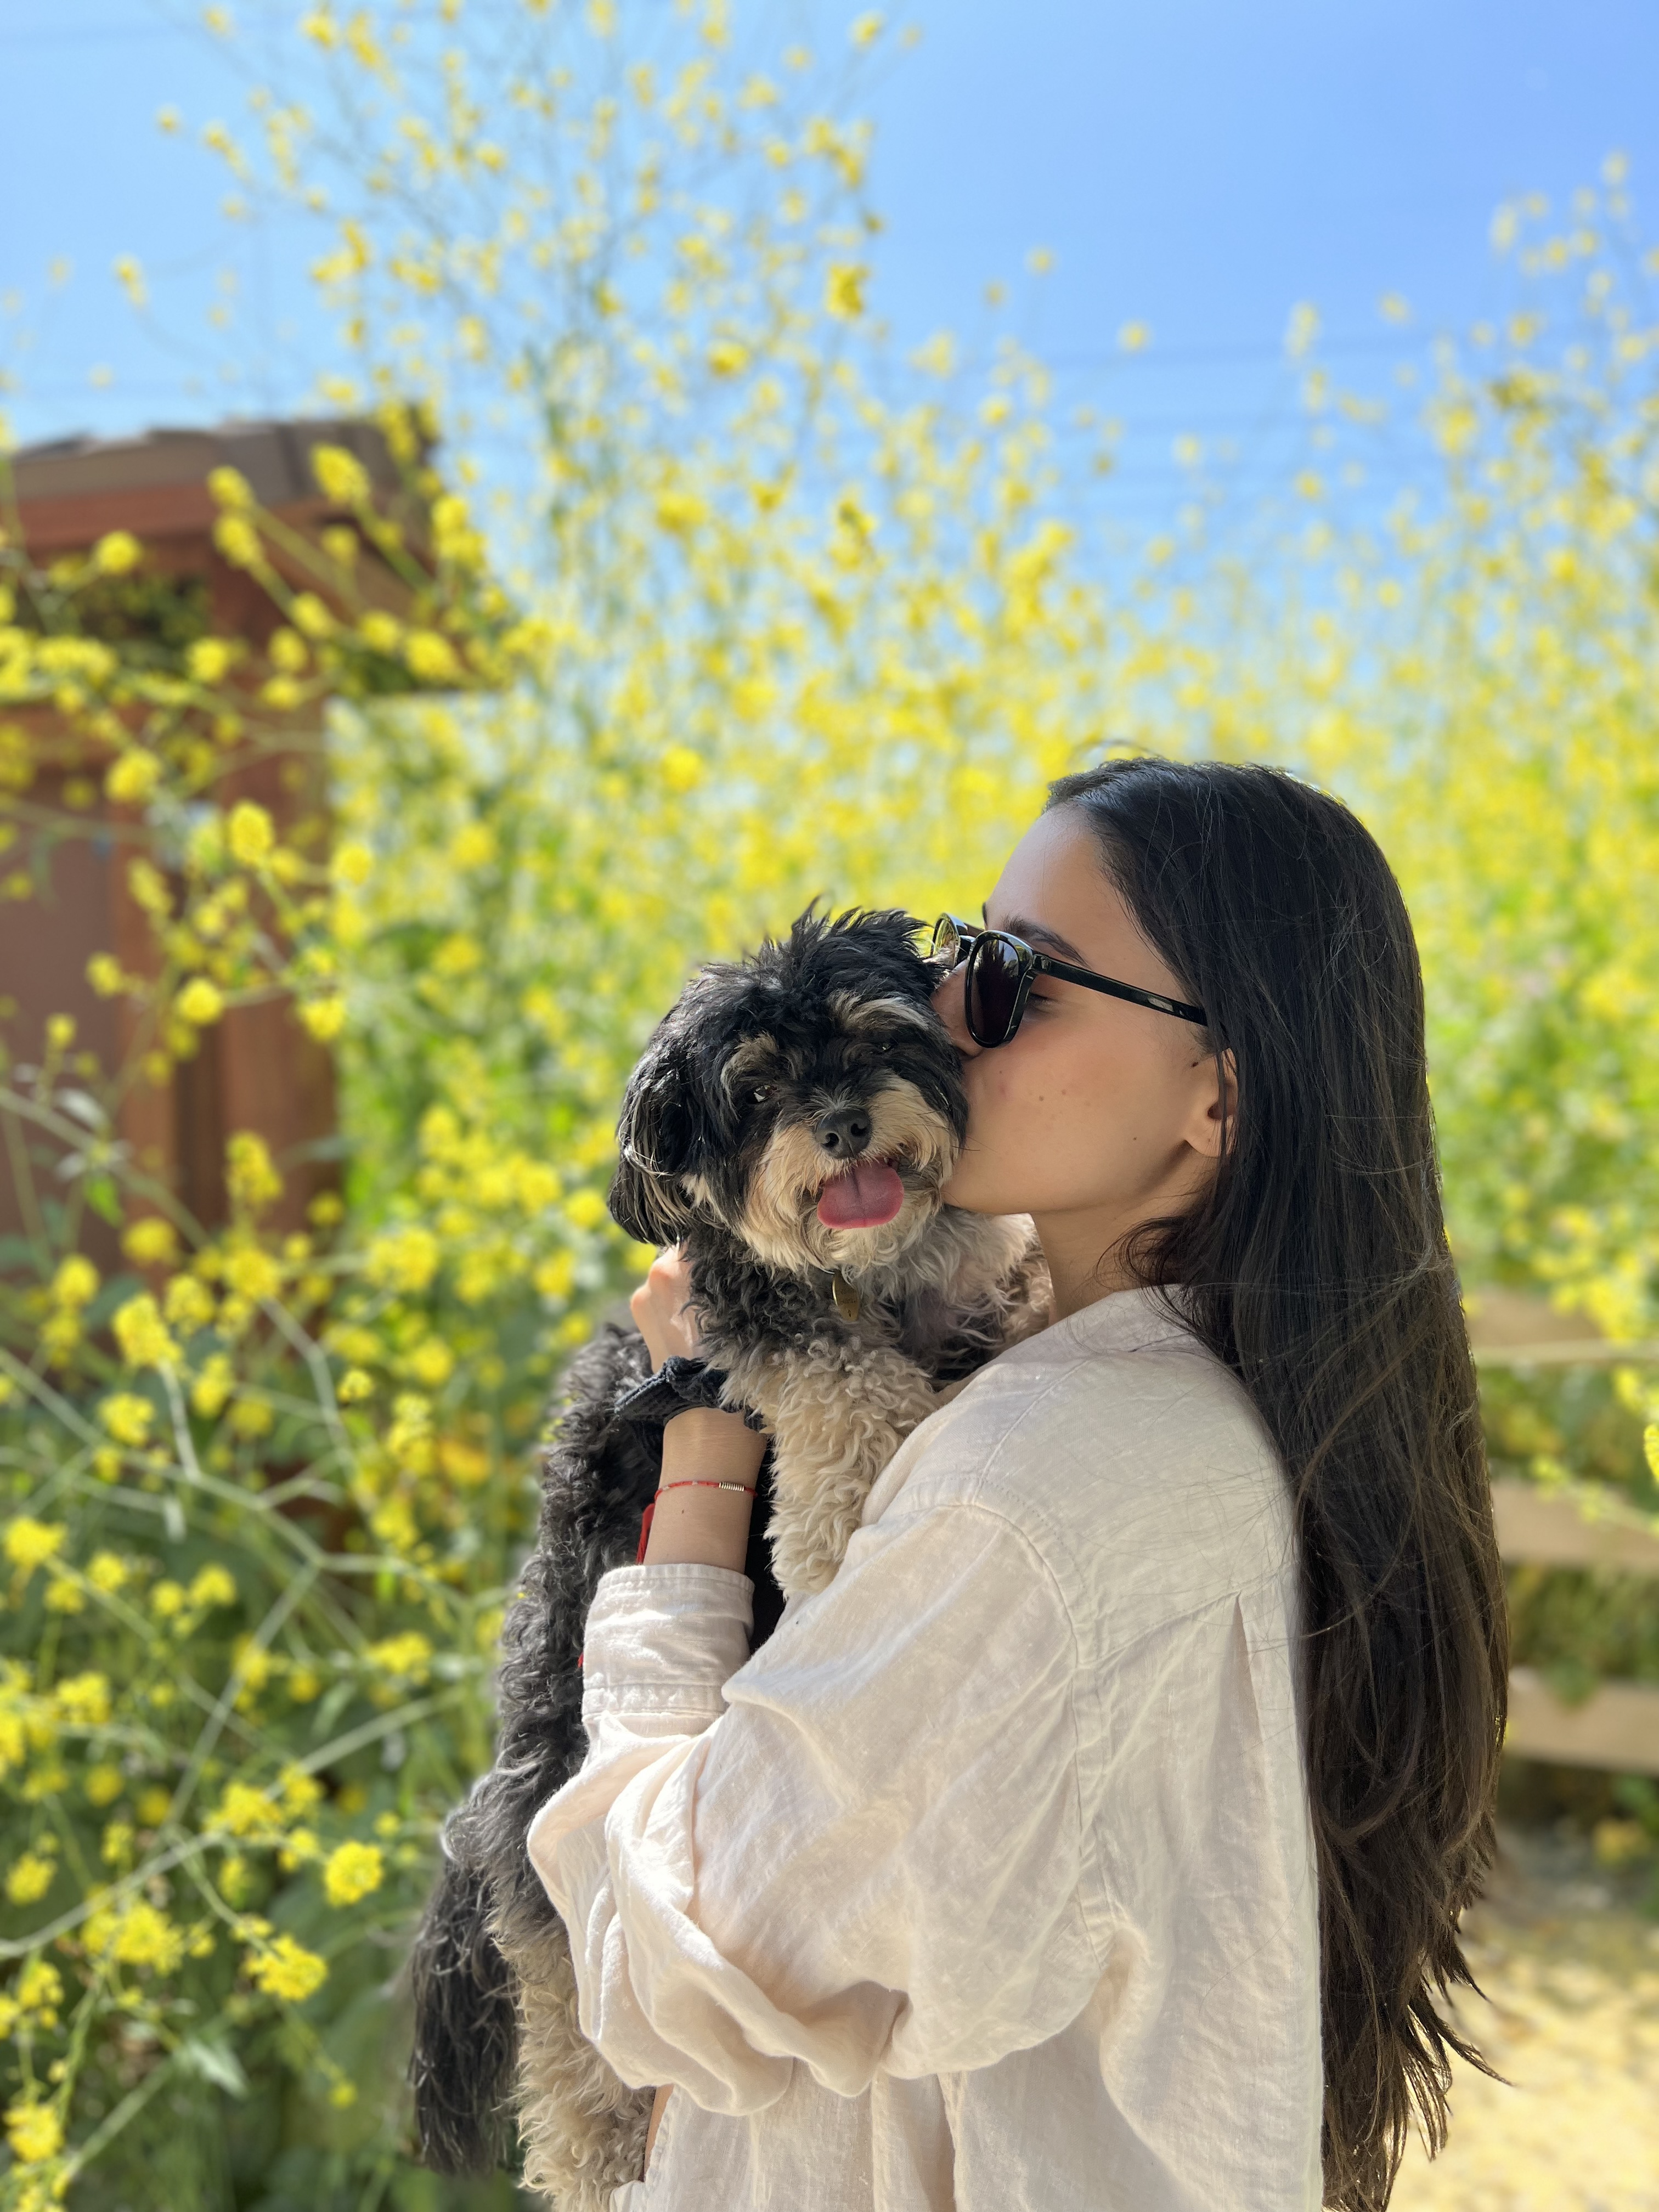 Jasmine Bains hugs a dog in front of a tree on a sunny day.